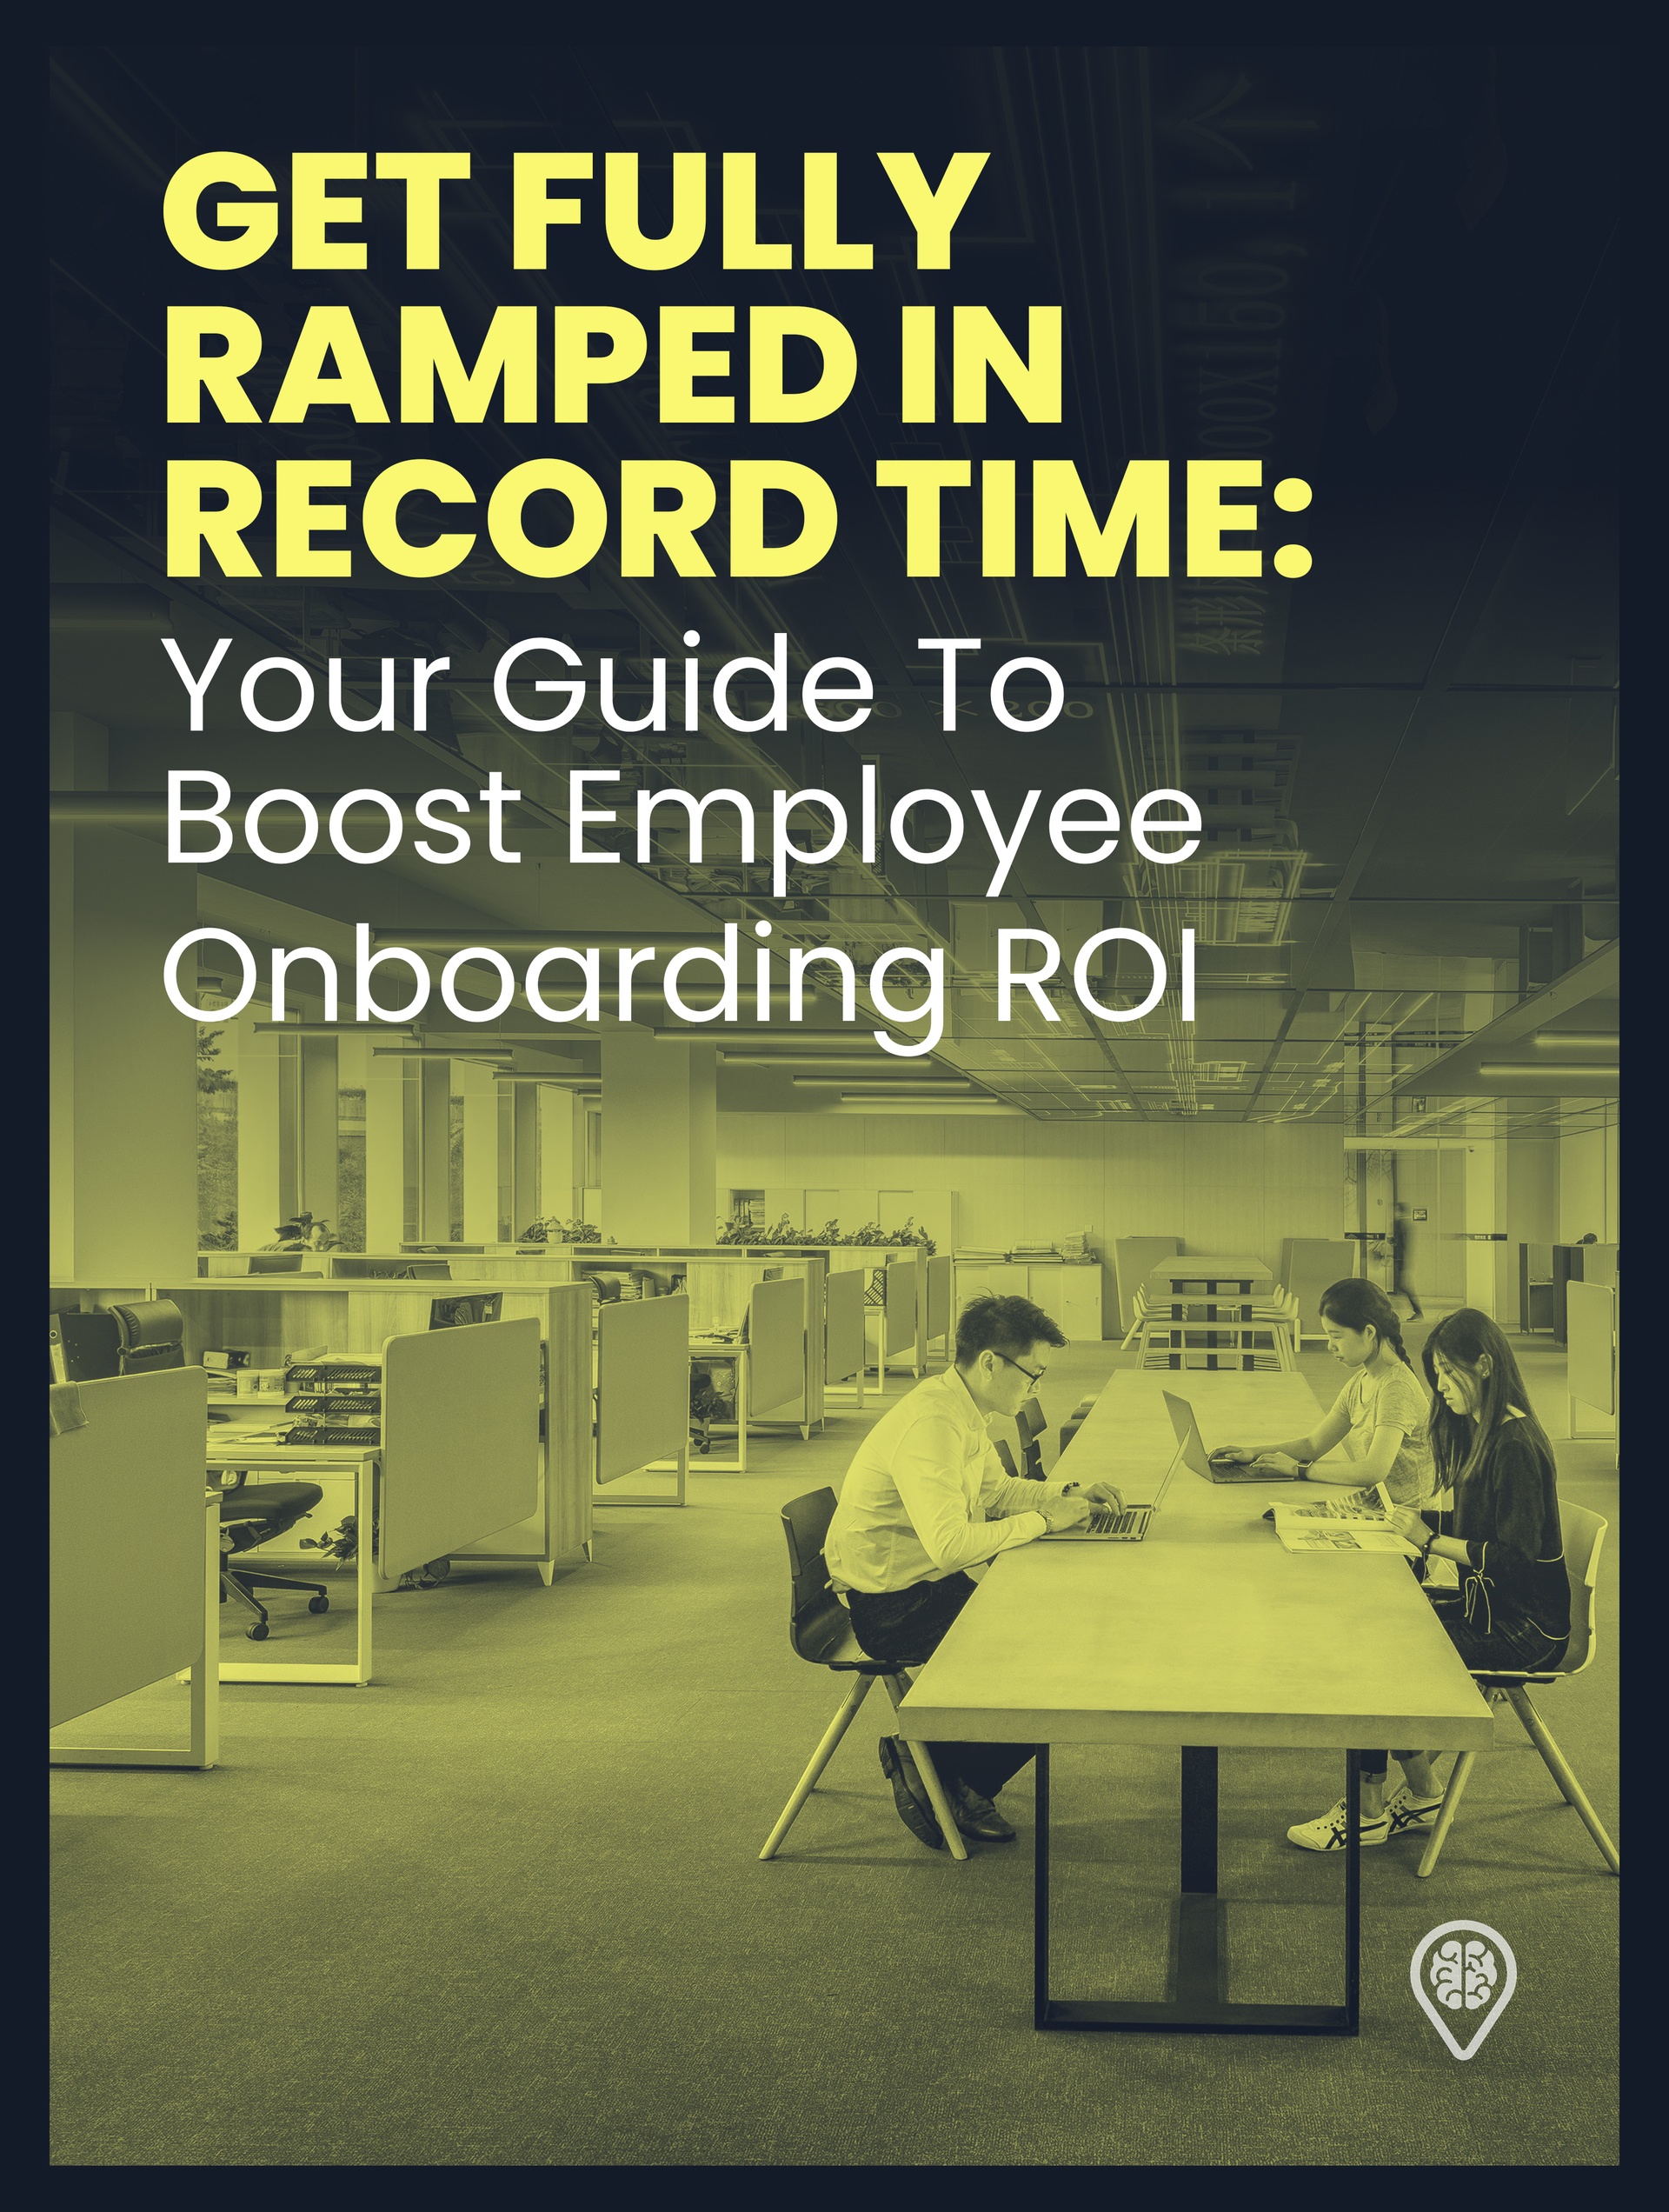 Get Fully Ramped In Record Time: Your Guide To Boost Employee Onboarding ROI